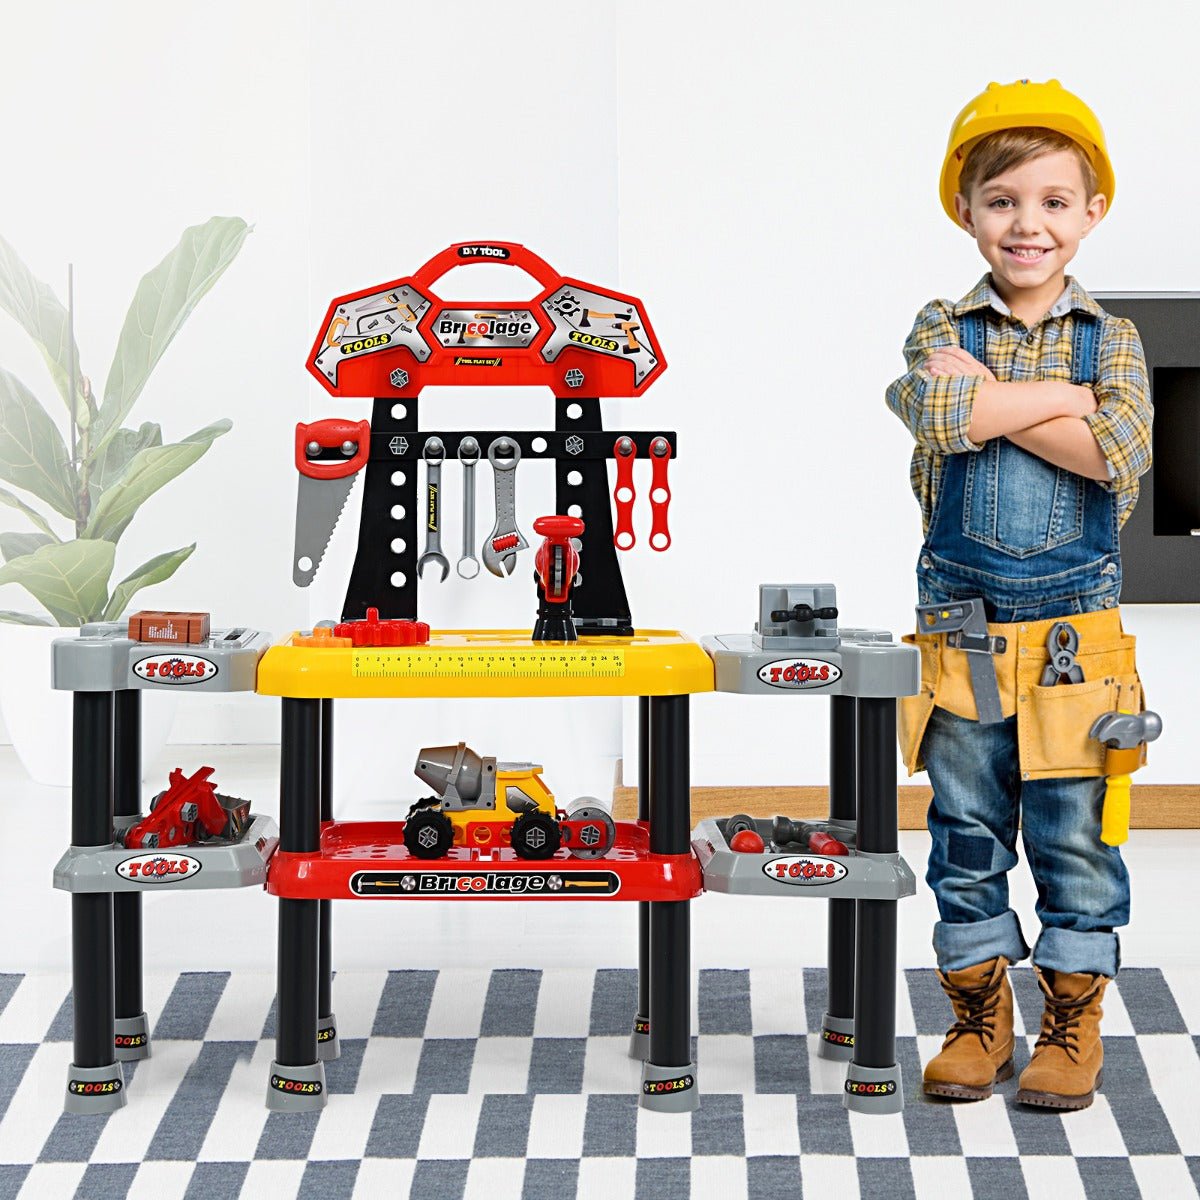 Double-Tier Toy Tool Play Set: 121 PCS of Imaginative Fun for Kids